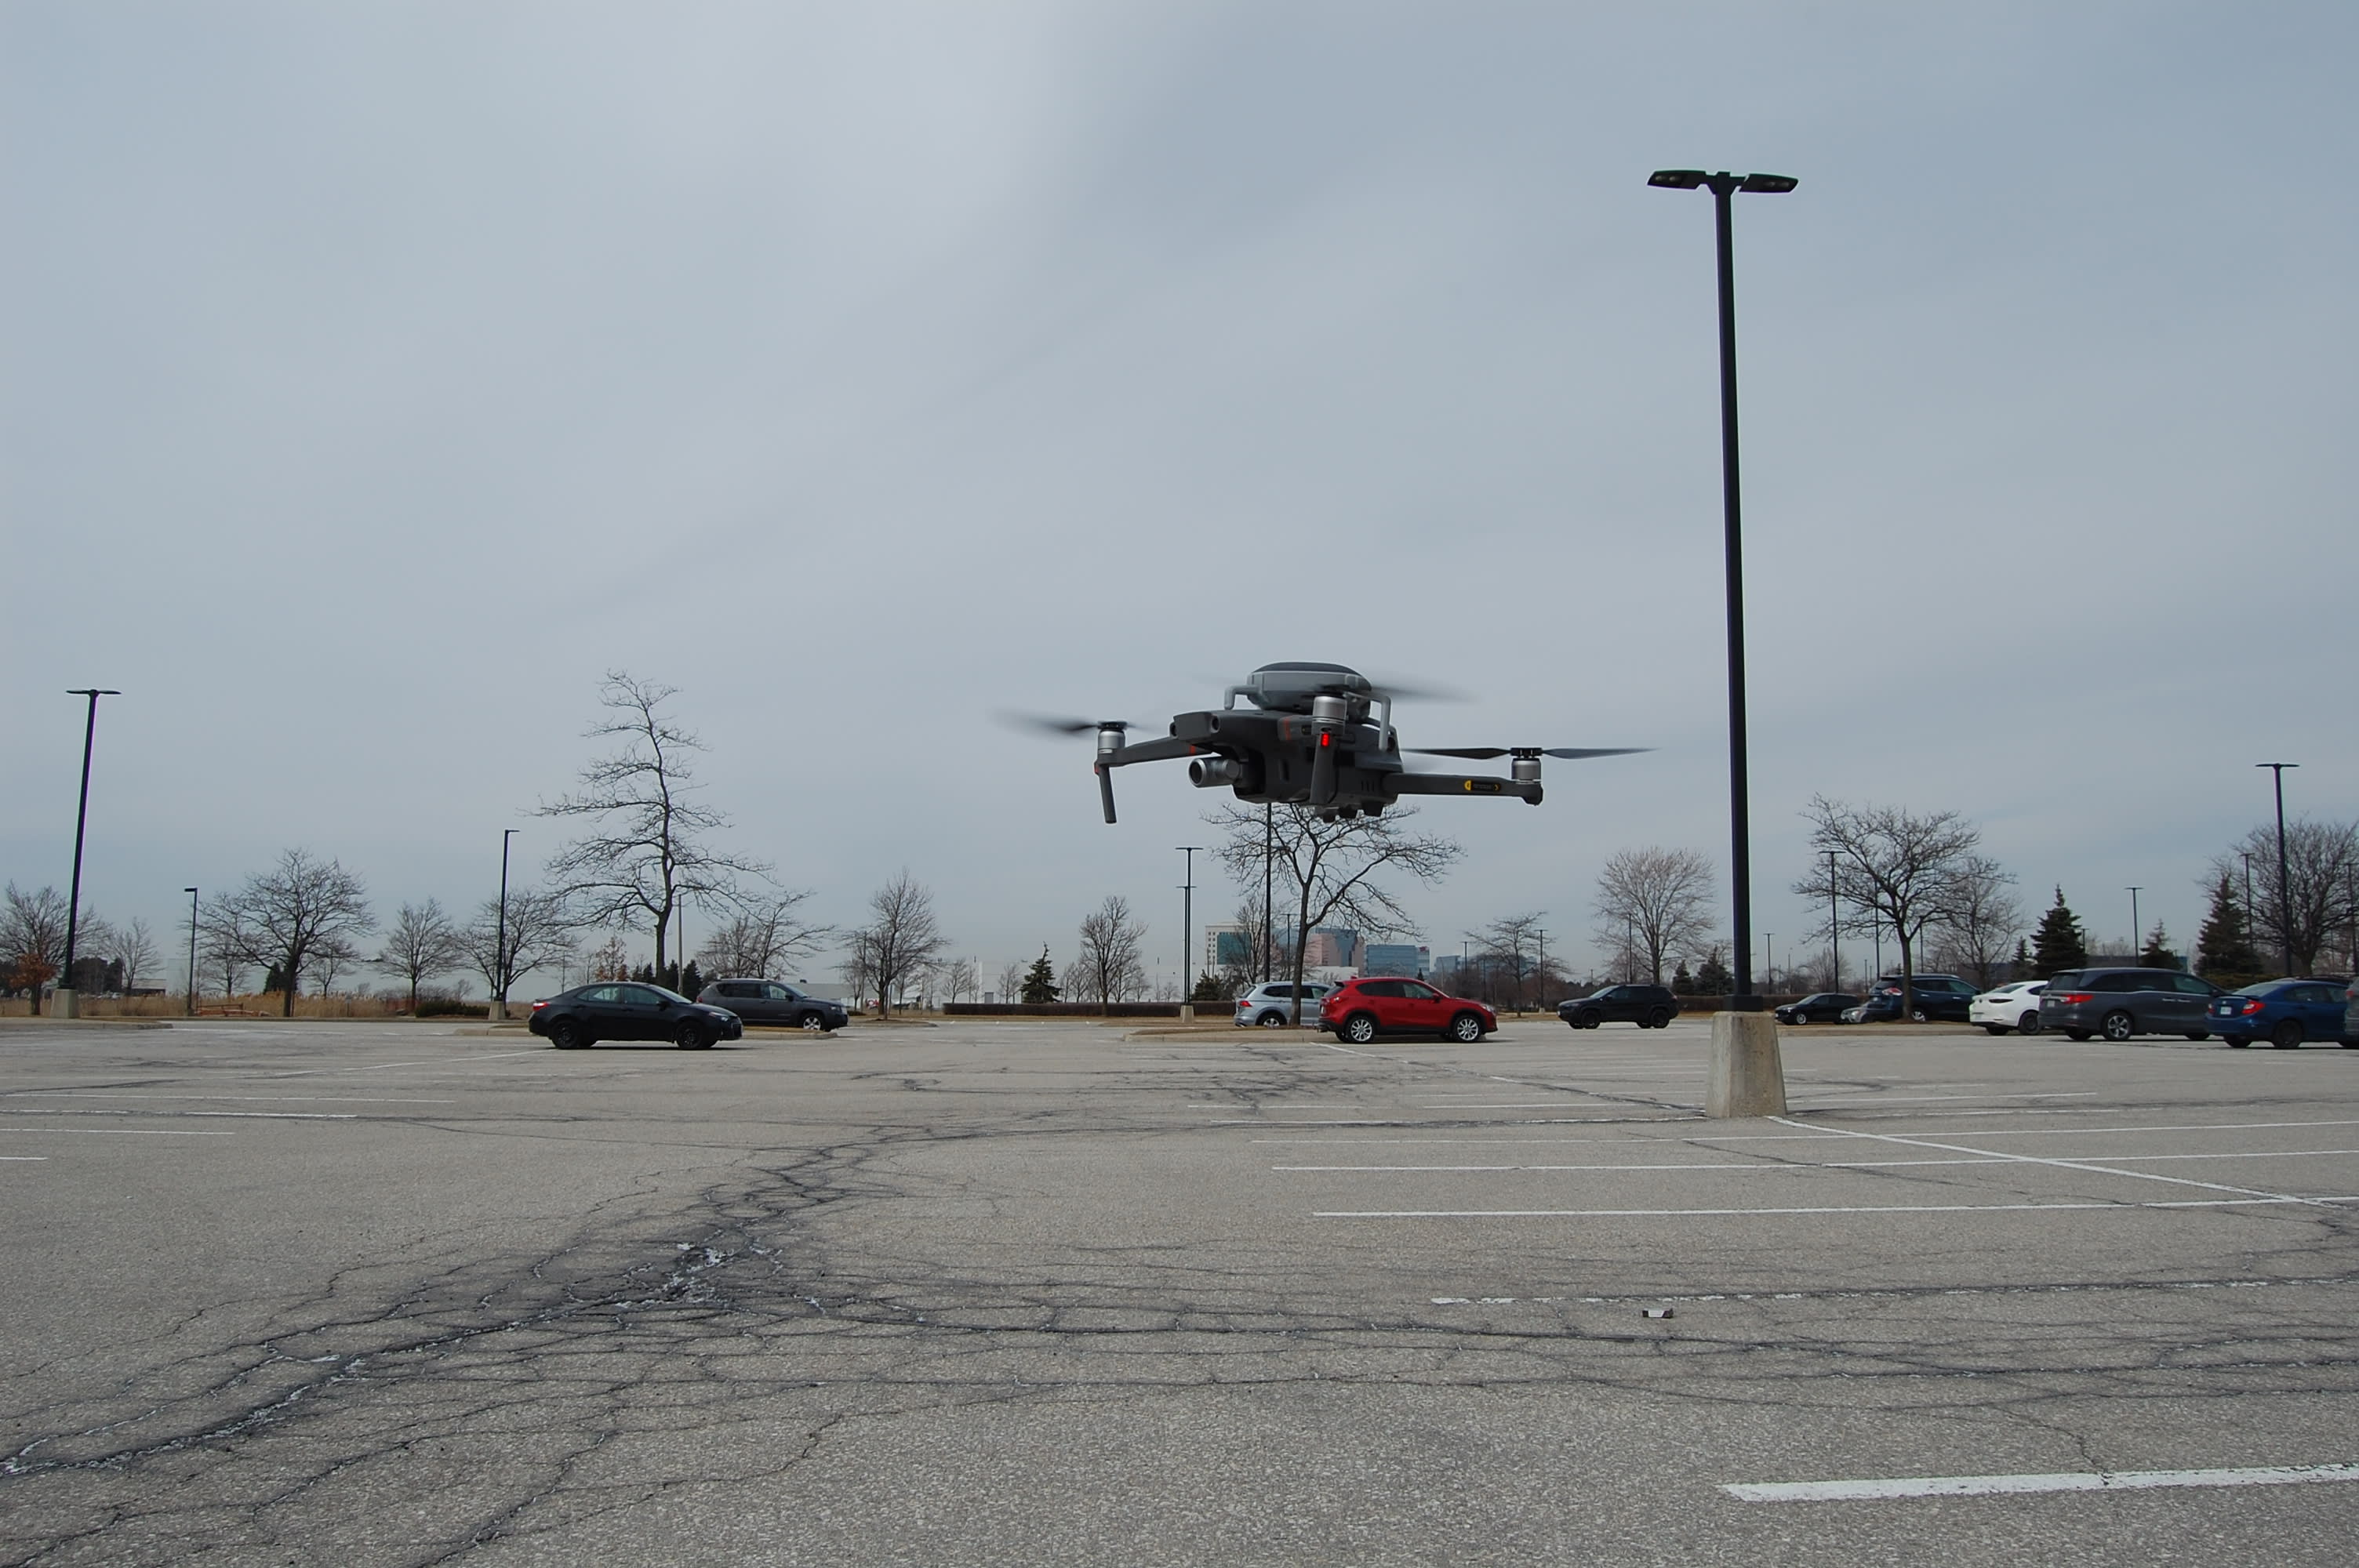 A drone takes off from a parking lot.